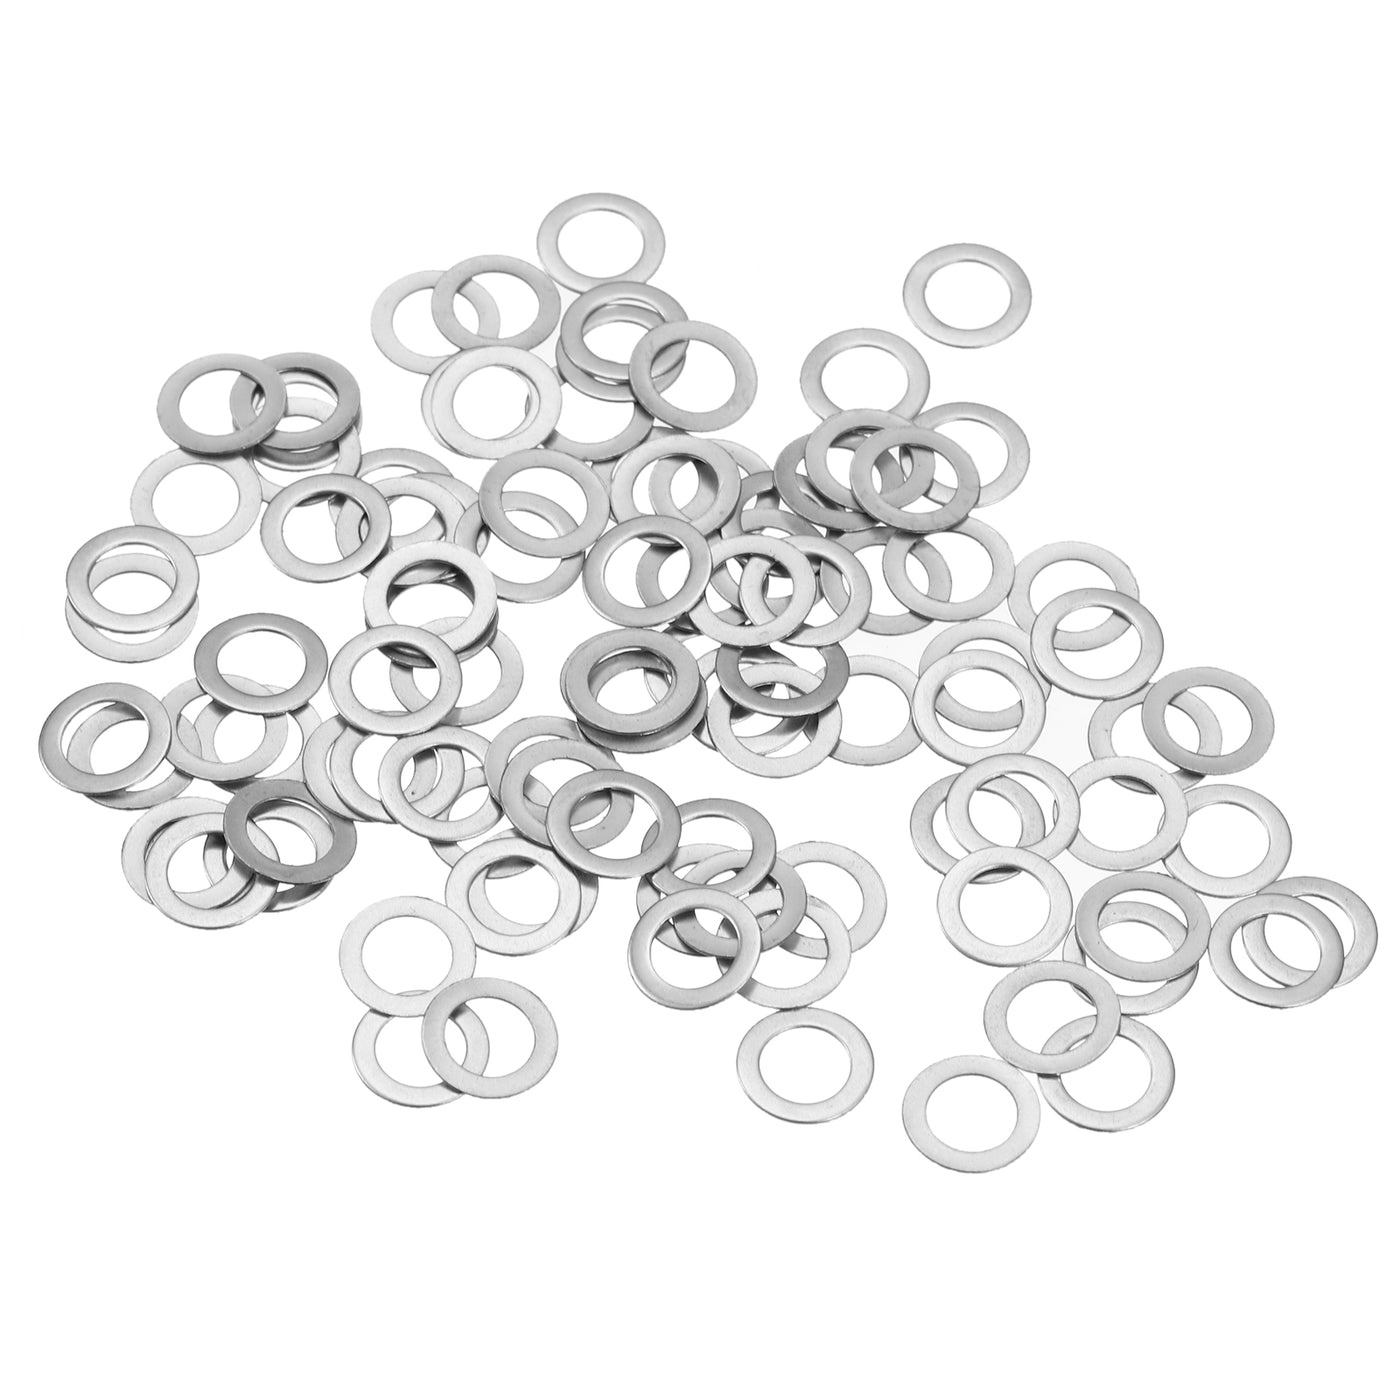 uxcell Uxcell M5 304 Stainless Steel Flat Washers, 100pcs 5x8x0.3mm Ultra Thin Flat Spacers